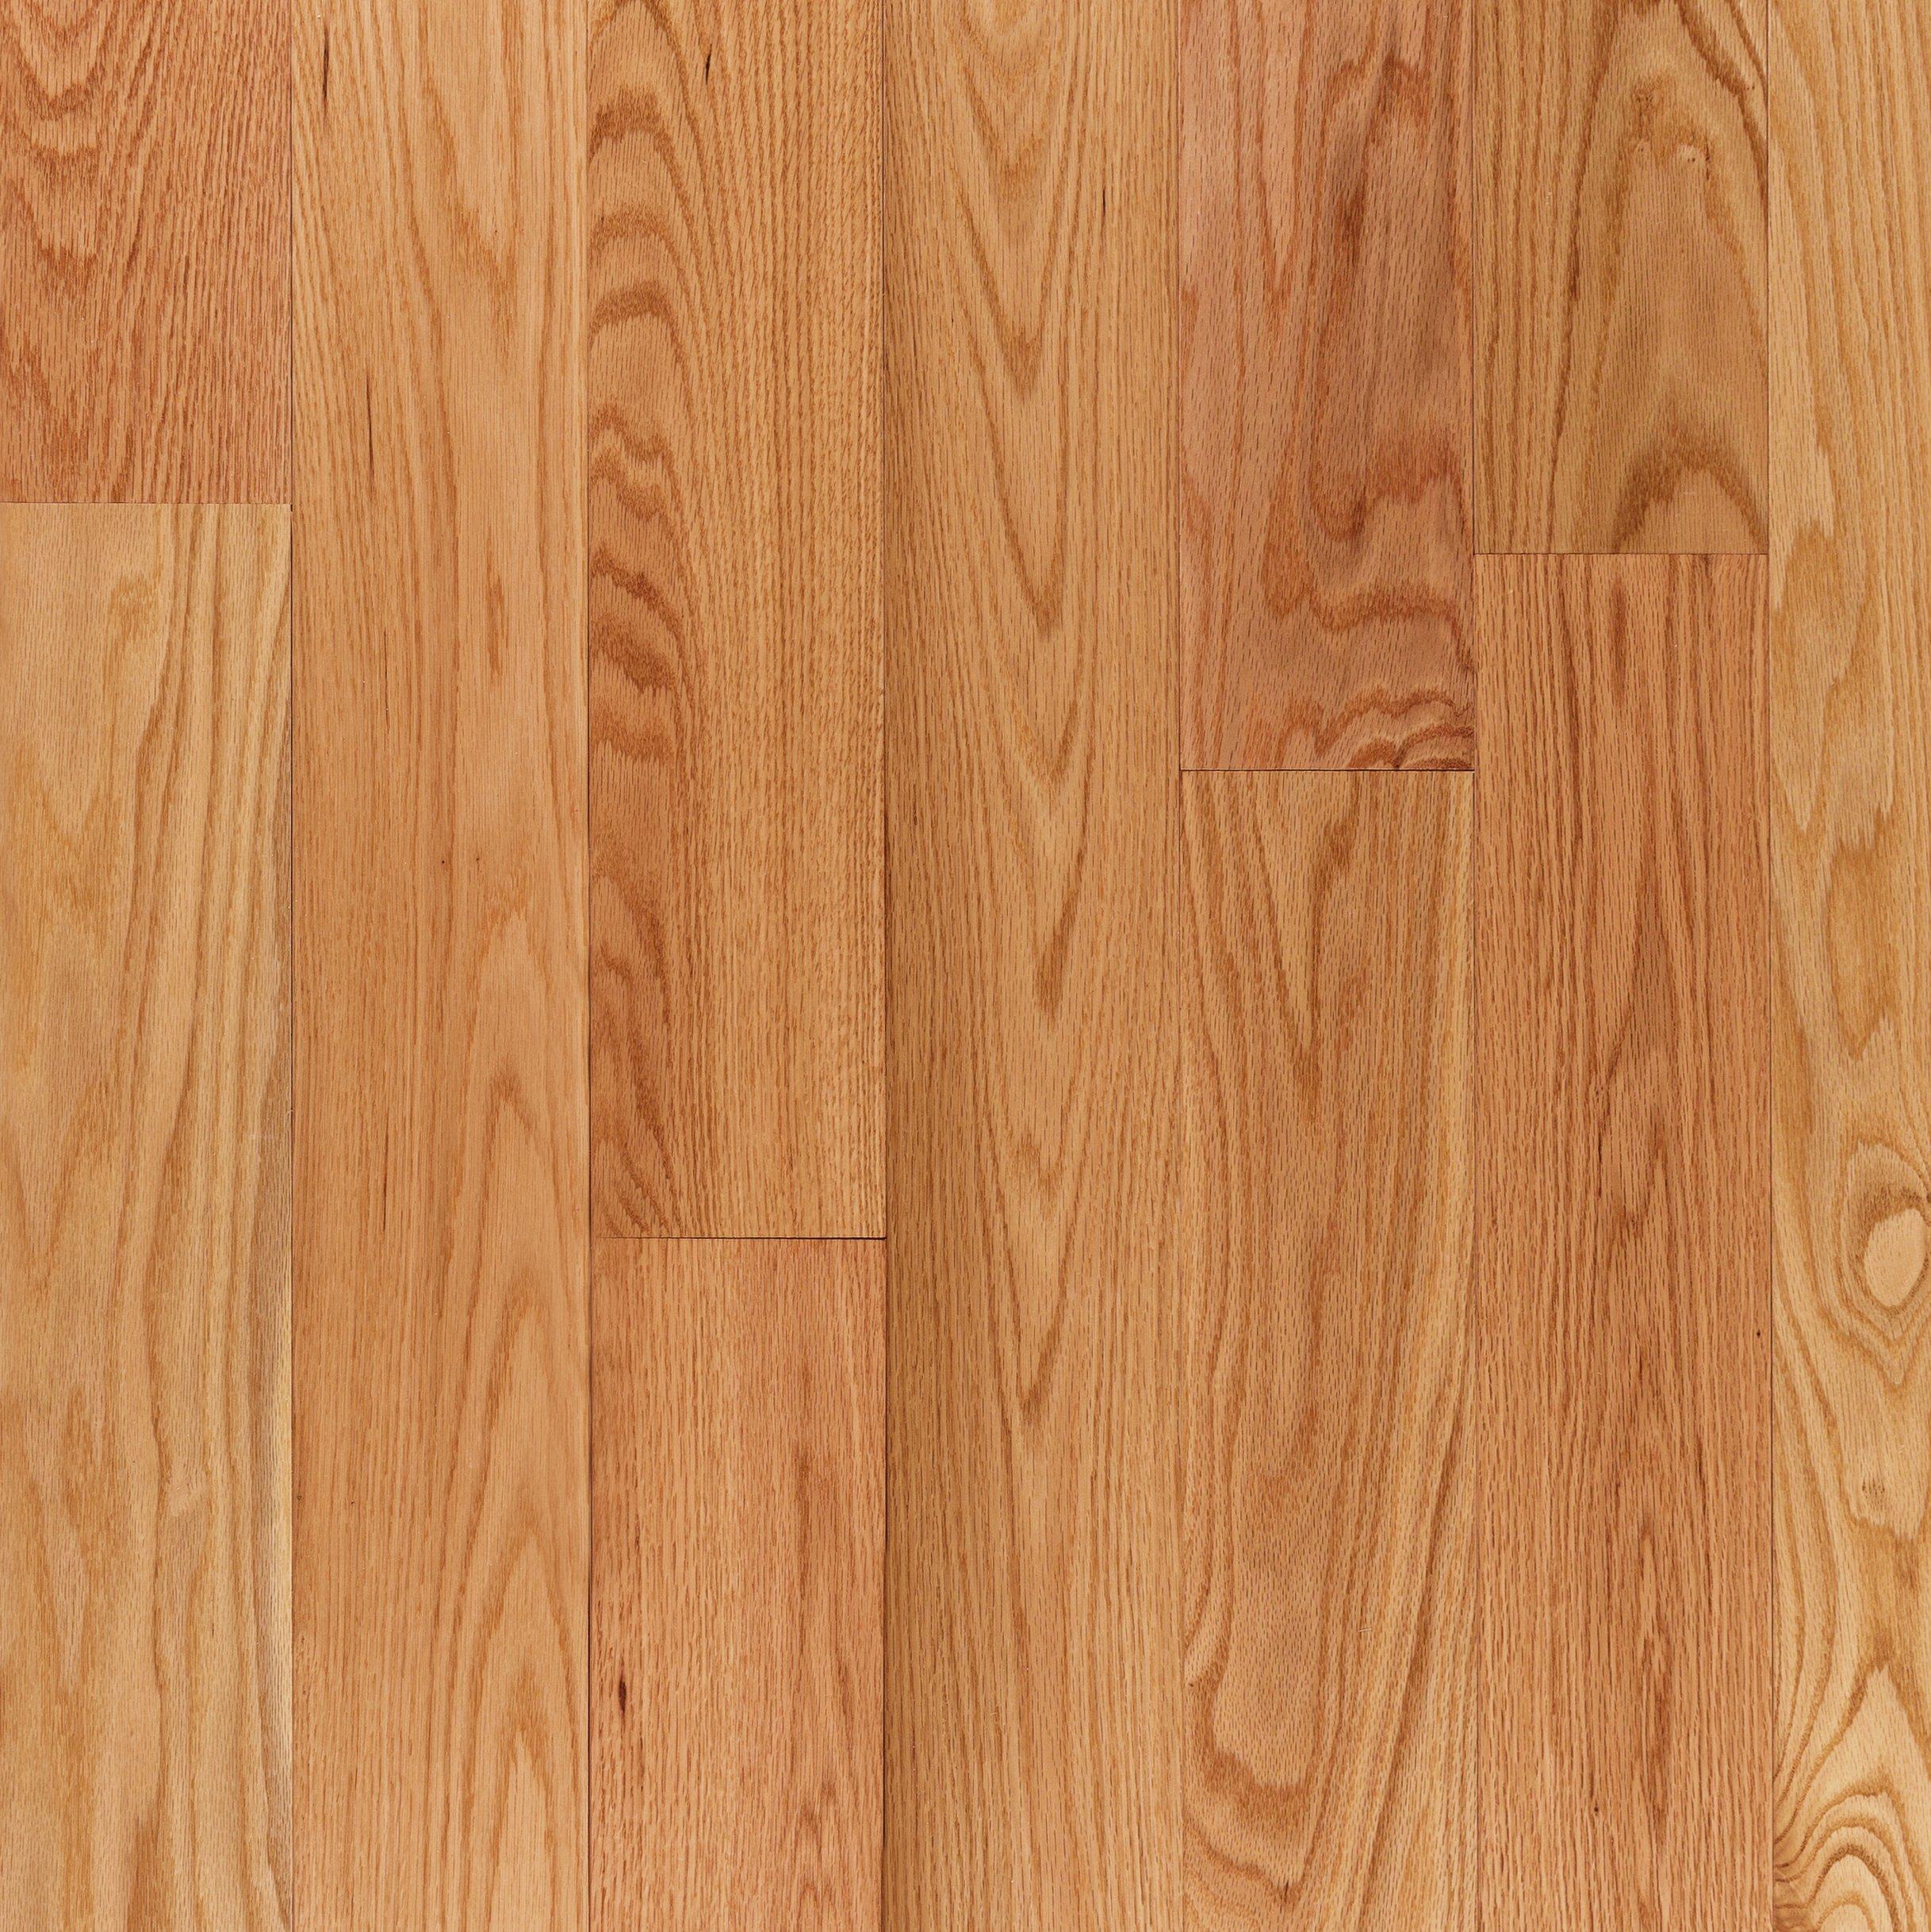 Red Oak Smooth Solid Hardwood Floor, Can You Refinish Bruce Prefinished Hardwood Floors